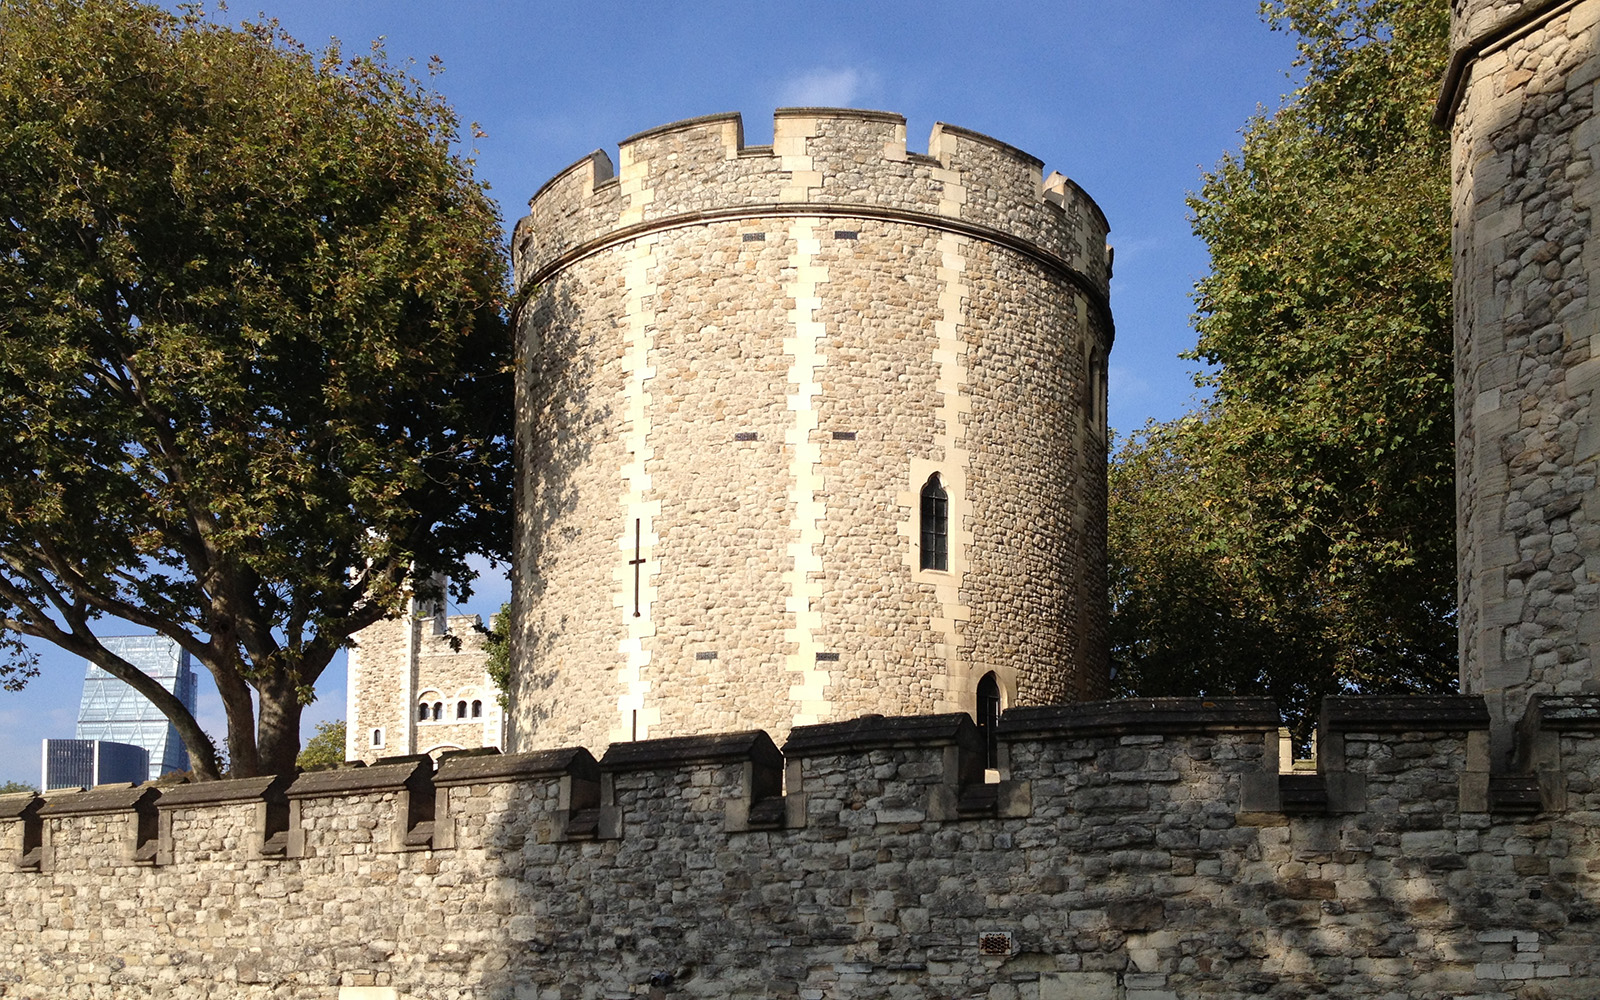 Tower of London, 4 October 2015